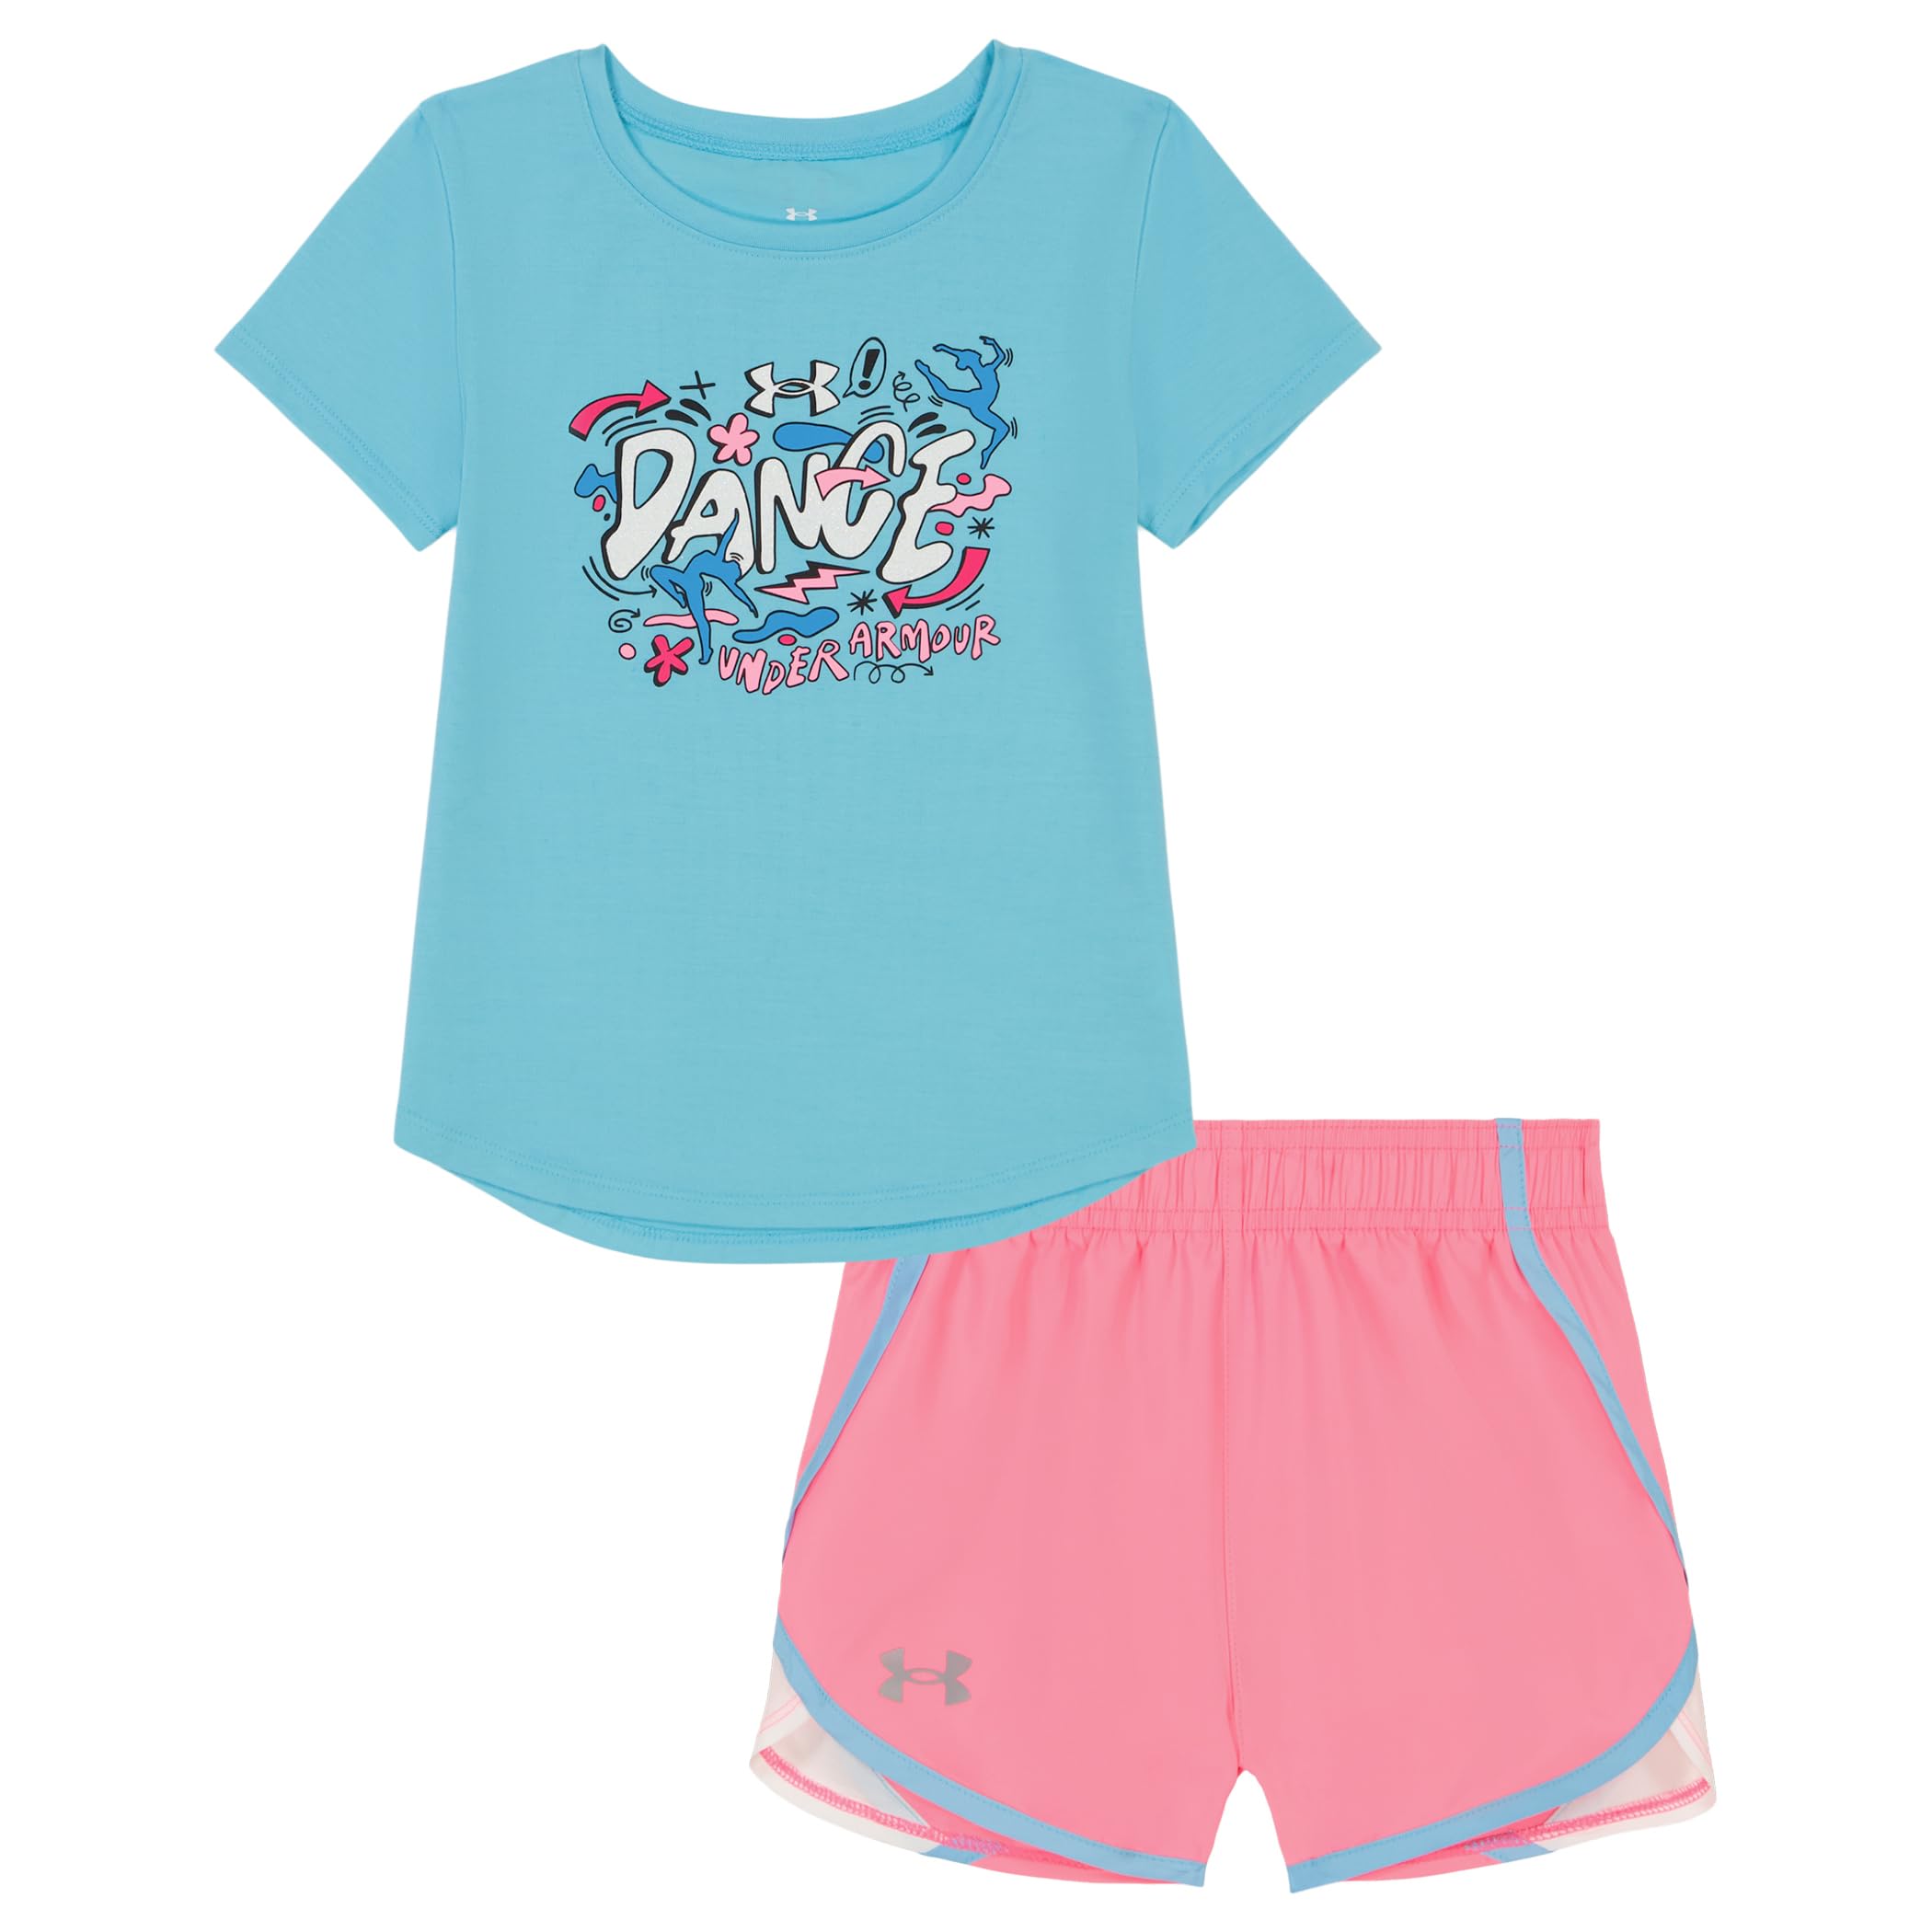 Under Armour Girls Short Sleeve Shirt and Shorts Set, Durable Stretch and Lightweight